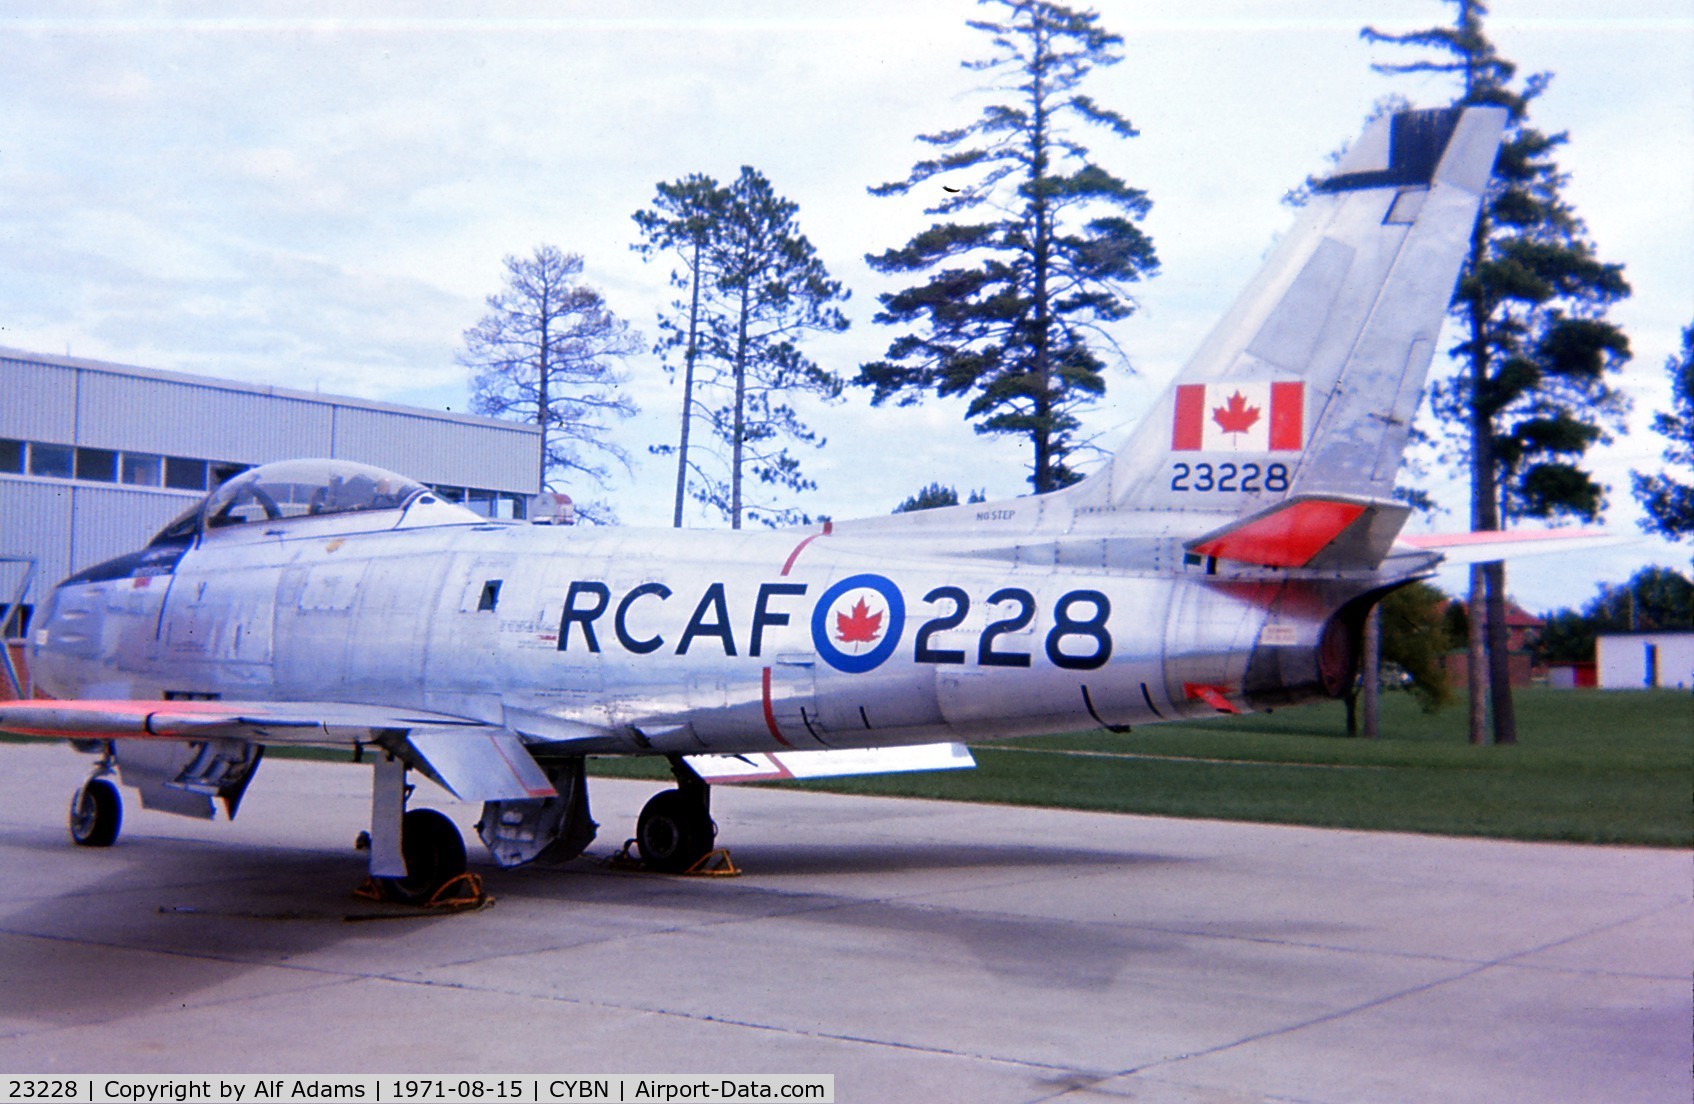 23228, Canadair CL-13A Sabre 5 C/N 1018, Sabre 23228 shown at Canadian Forces Base Borden, Ontario in August 1971 where it was being used as an instructional airframe.